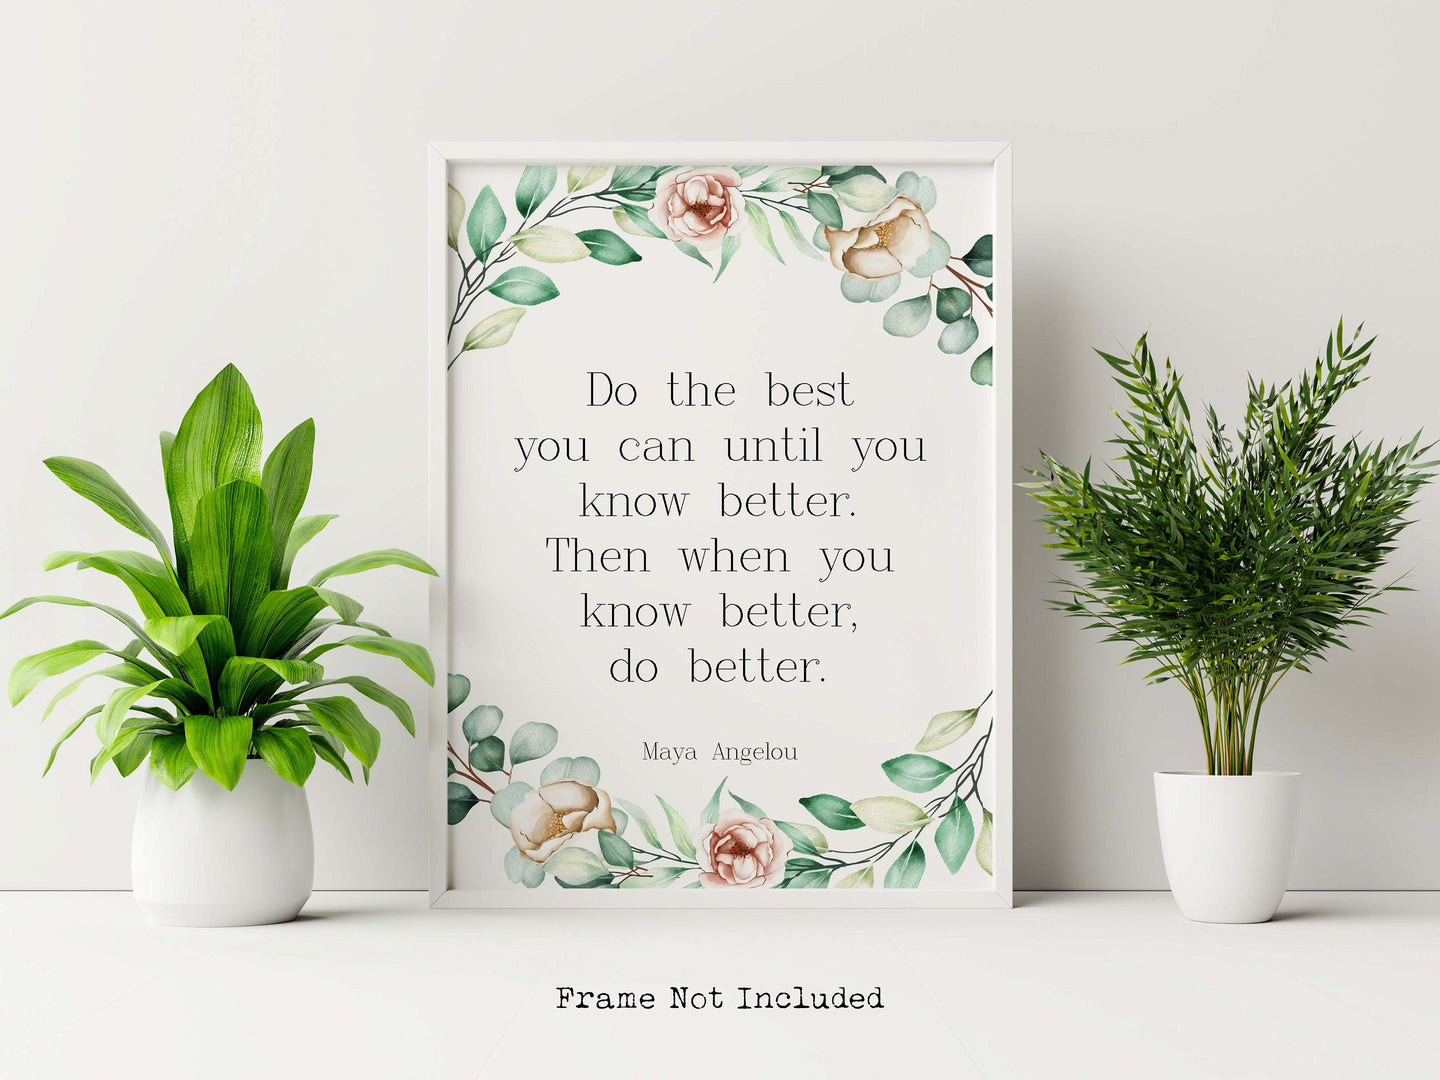 Maya Angelou Quote - Do the best you can until you know better - Unframed inspirational print for Home, Inspirational office wall art